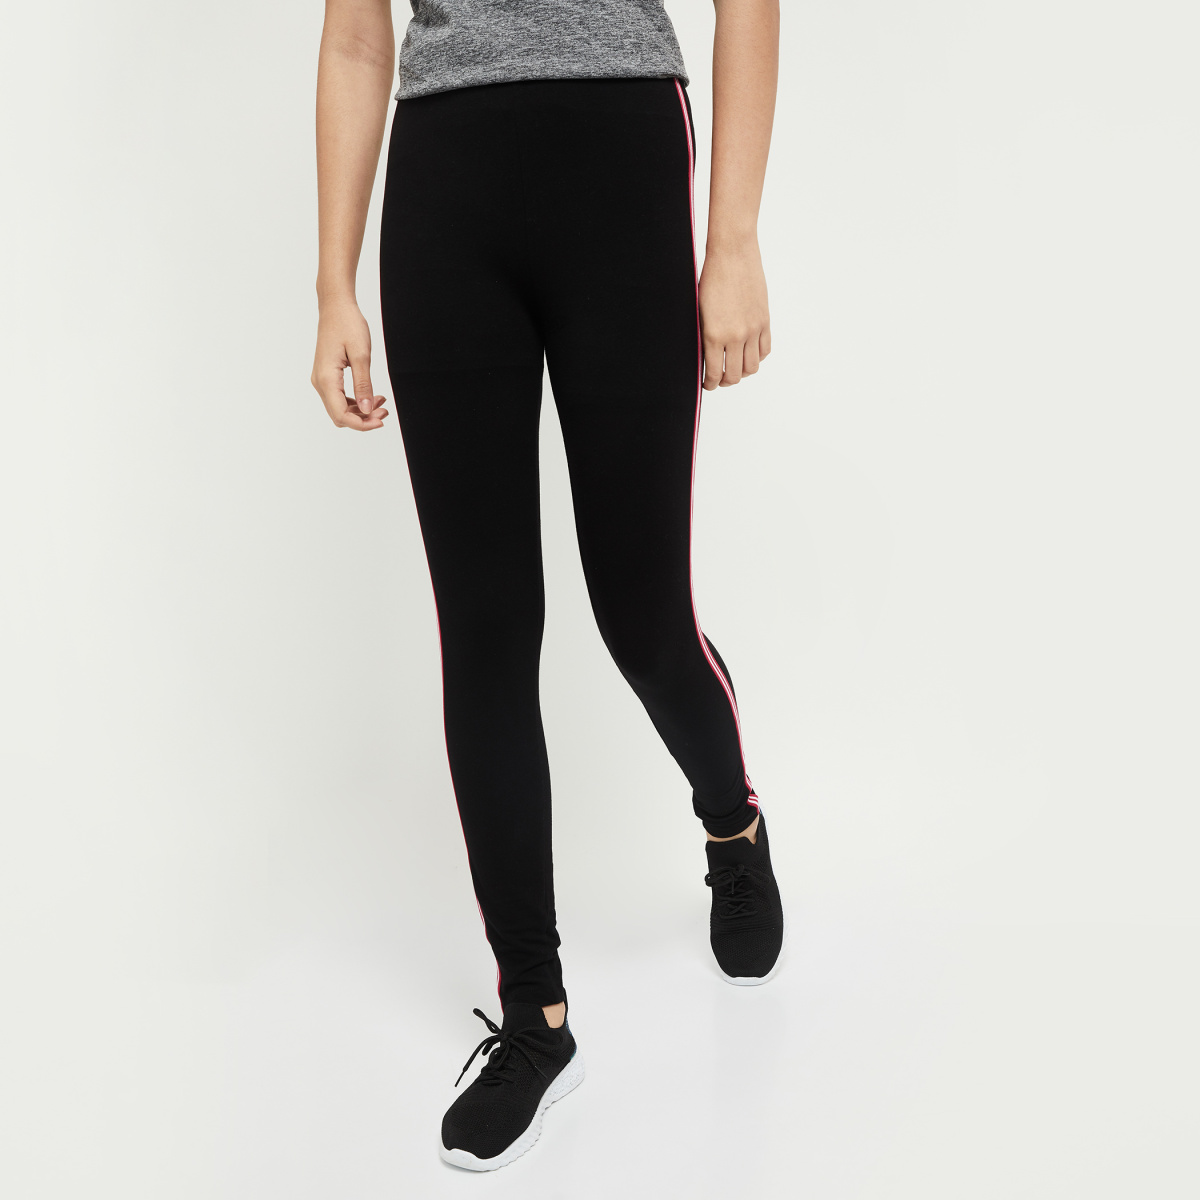 TALA. Activewear you'll feel good in, and good about.